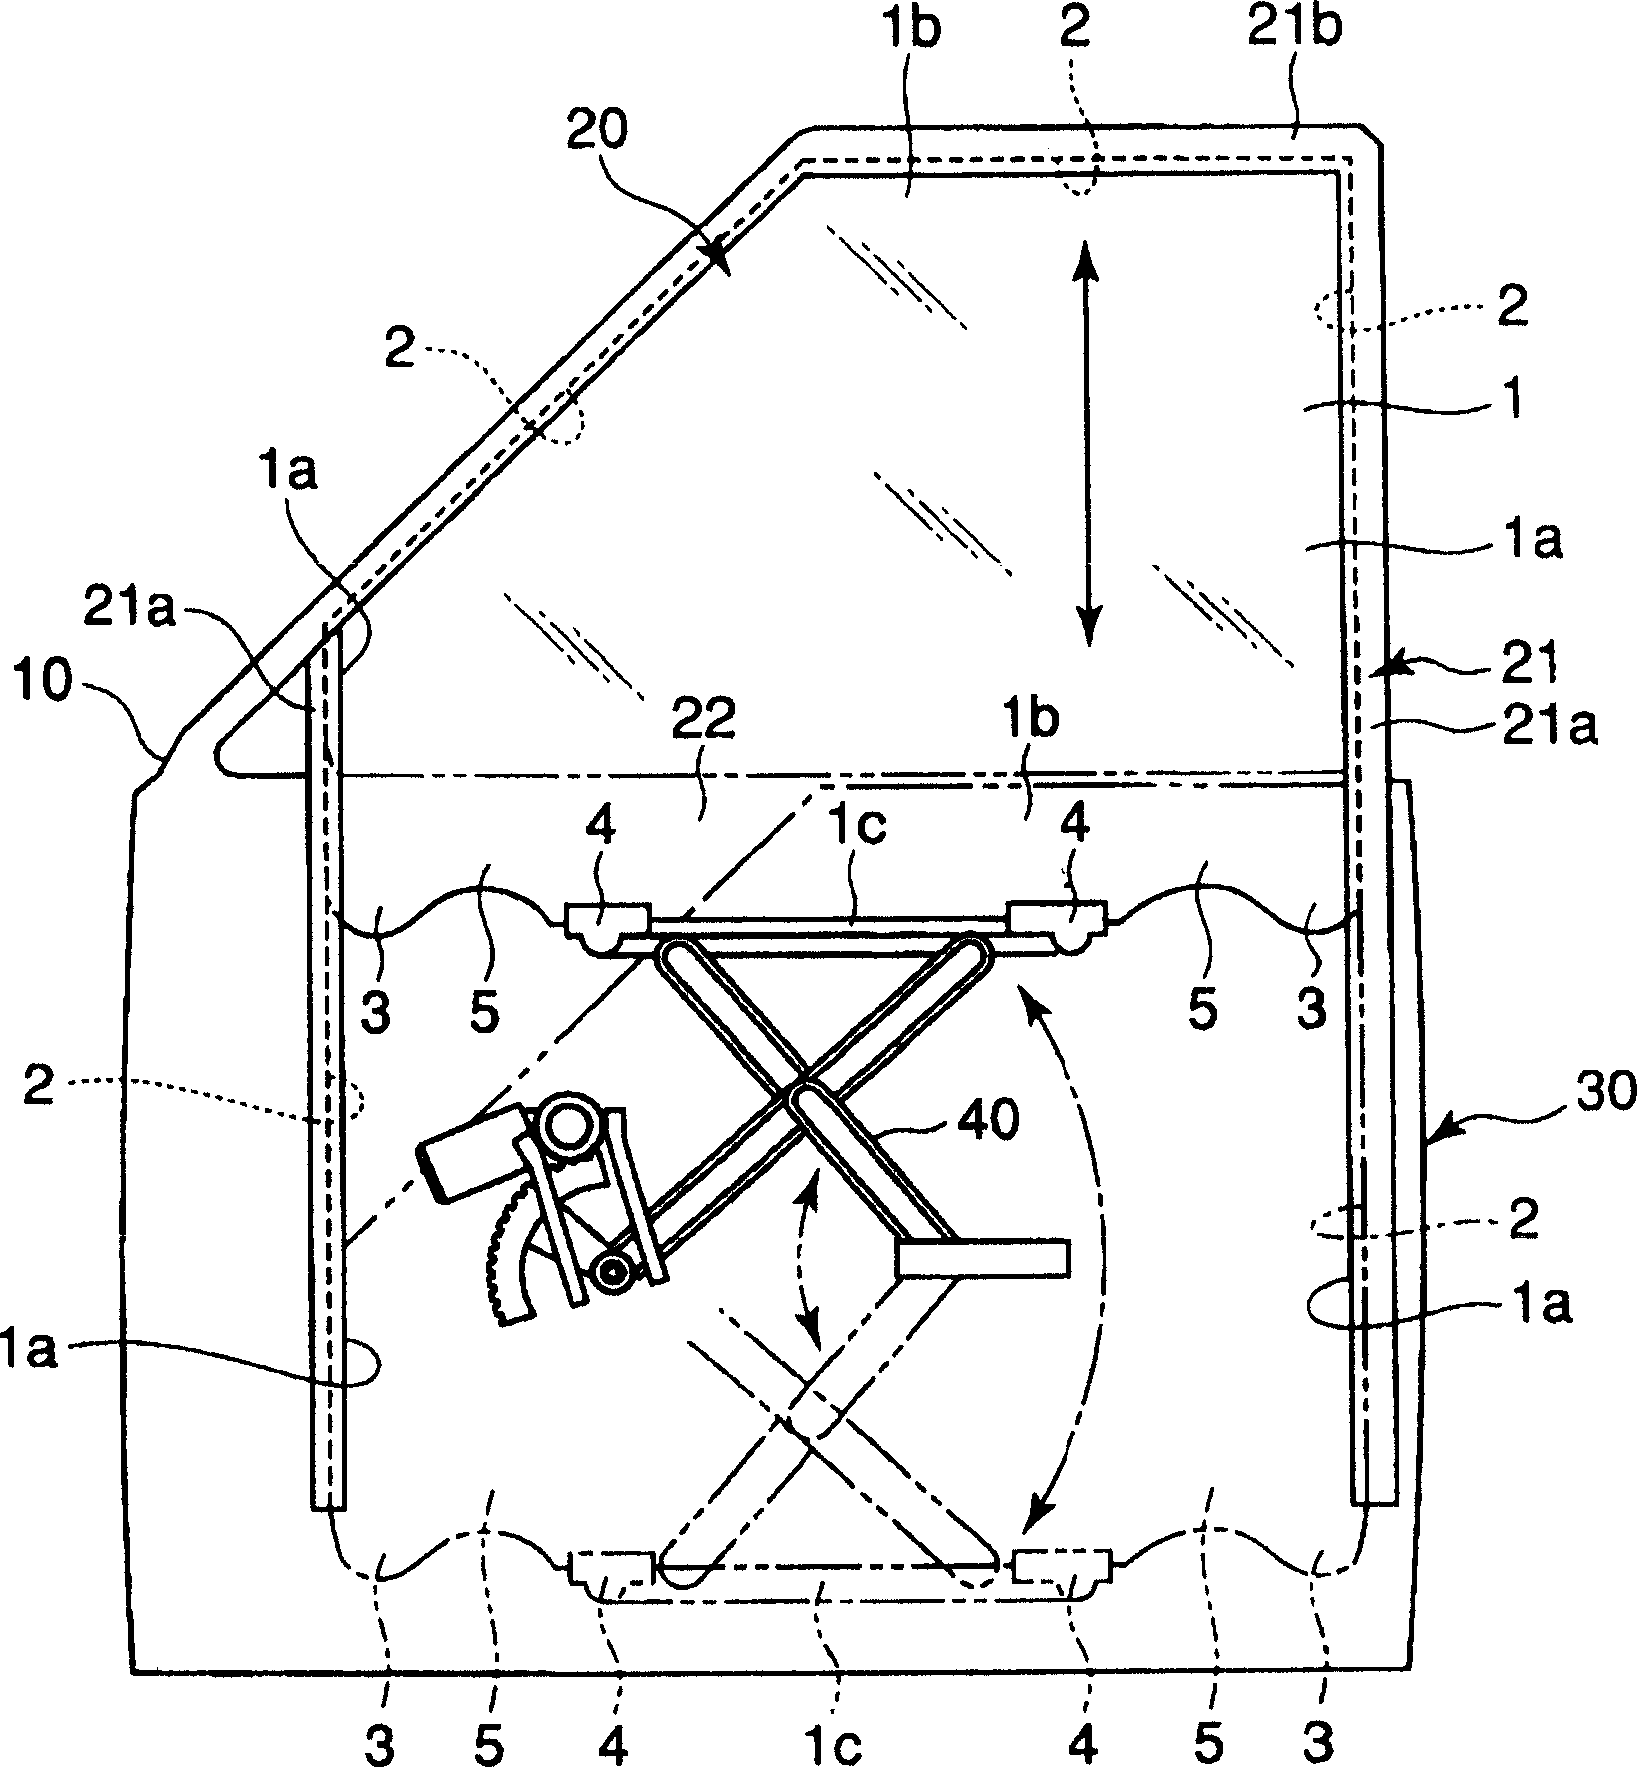 Water drop induction structure of elevating glass